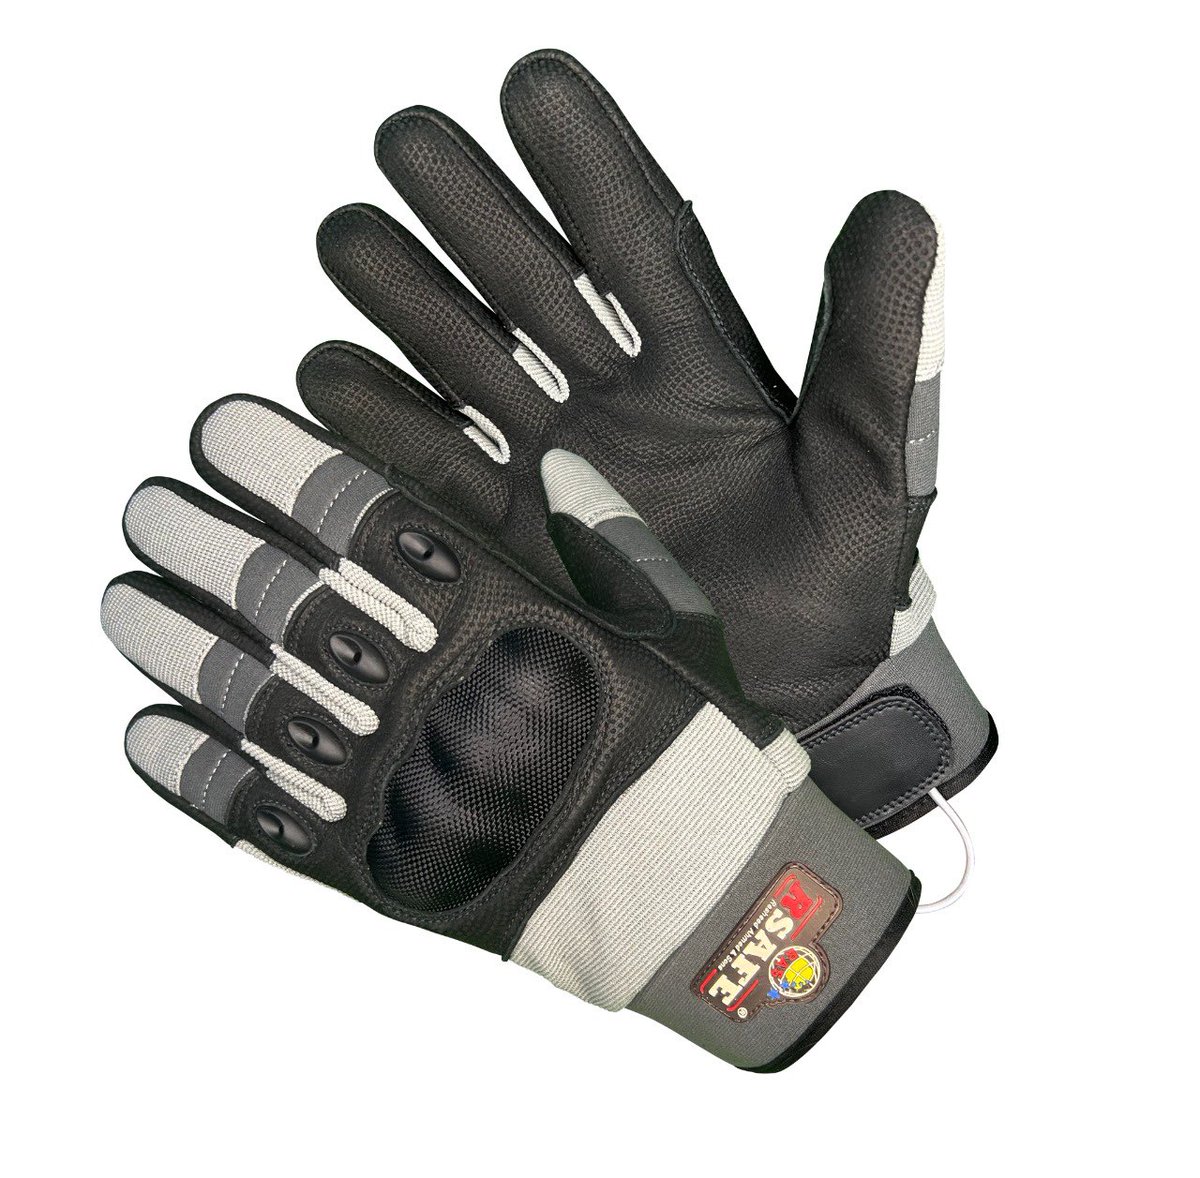 RSAFE® Motorbike Gloves
The glove is made of durable digital goatskin leather palm improves anti-slip and grip performance for motorcycle, this is lightweight comfortable gloves,
Nicely stitched, durable lightweight, top breathable and comfortable,